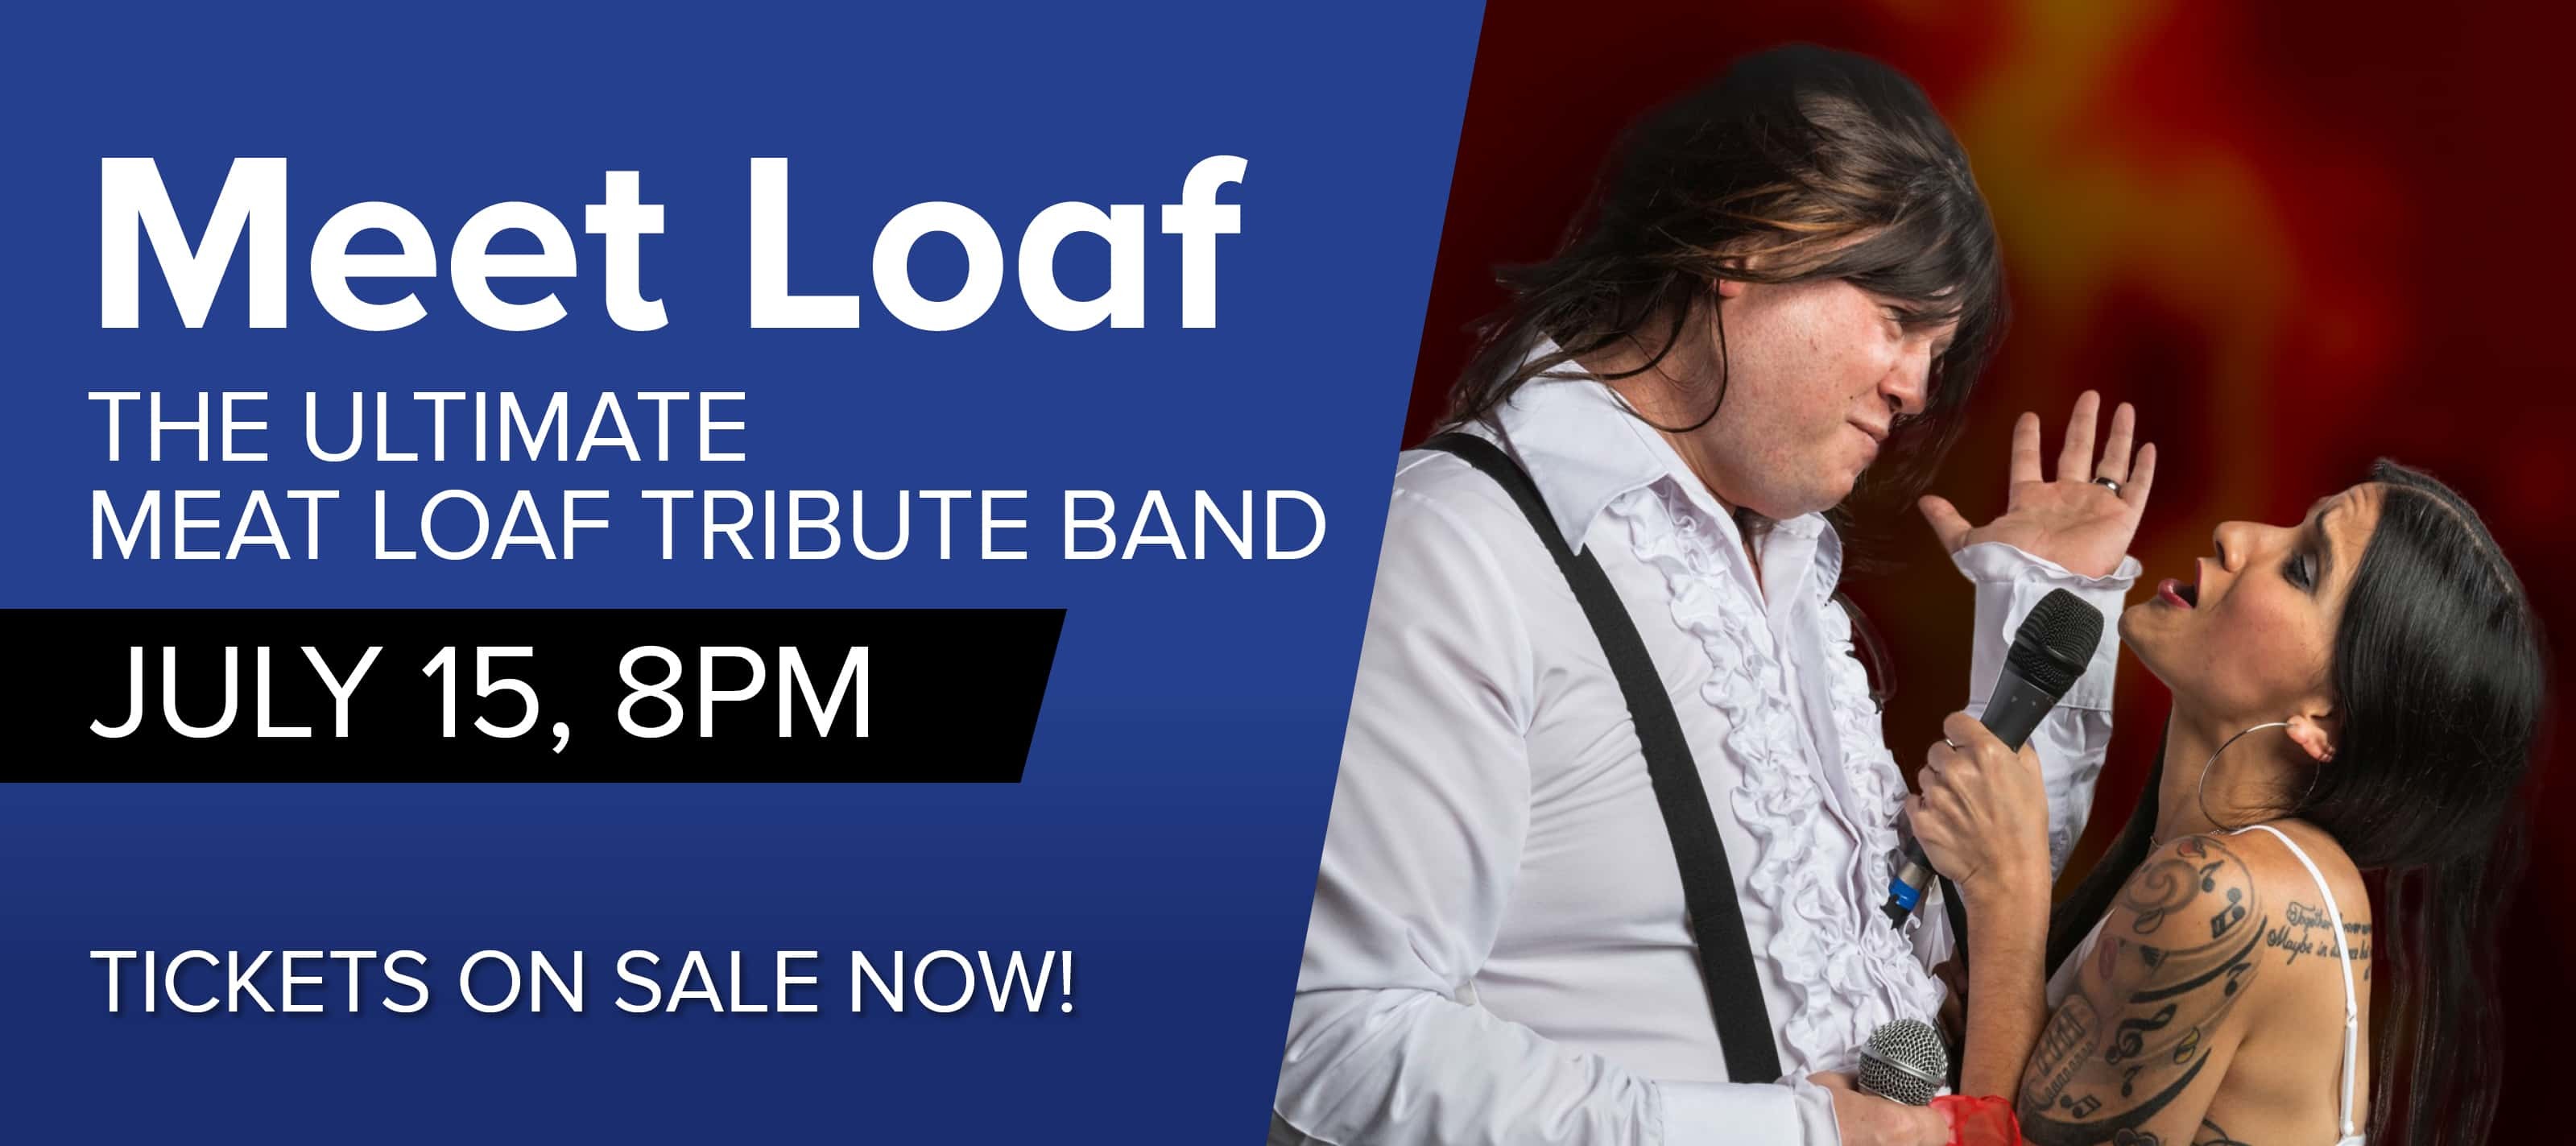 Members of Meat Loaf tribute band, Meet Loaf, sing to each other during a concert.  Text: Meet Loaf the Ultimate Meat Loaf Tribute Band Tickets on Sale Now.  Concert on July 15 at 8pm